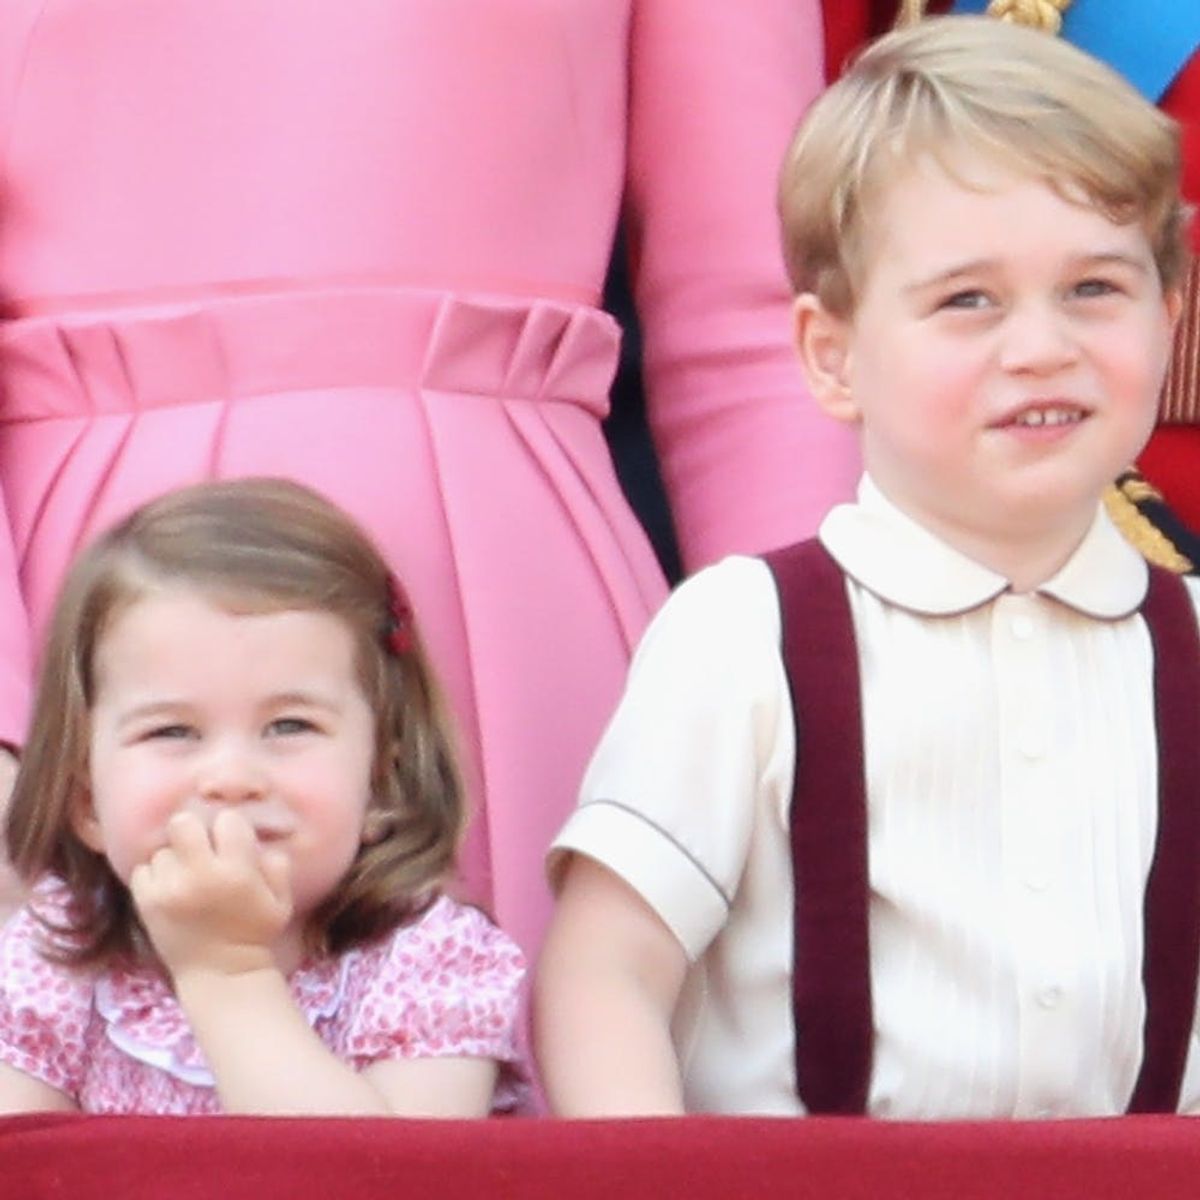 Princess Charlotte Looks After Prince George, According to Queen Elizabeth